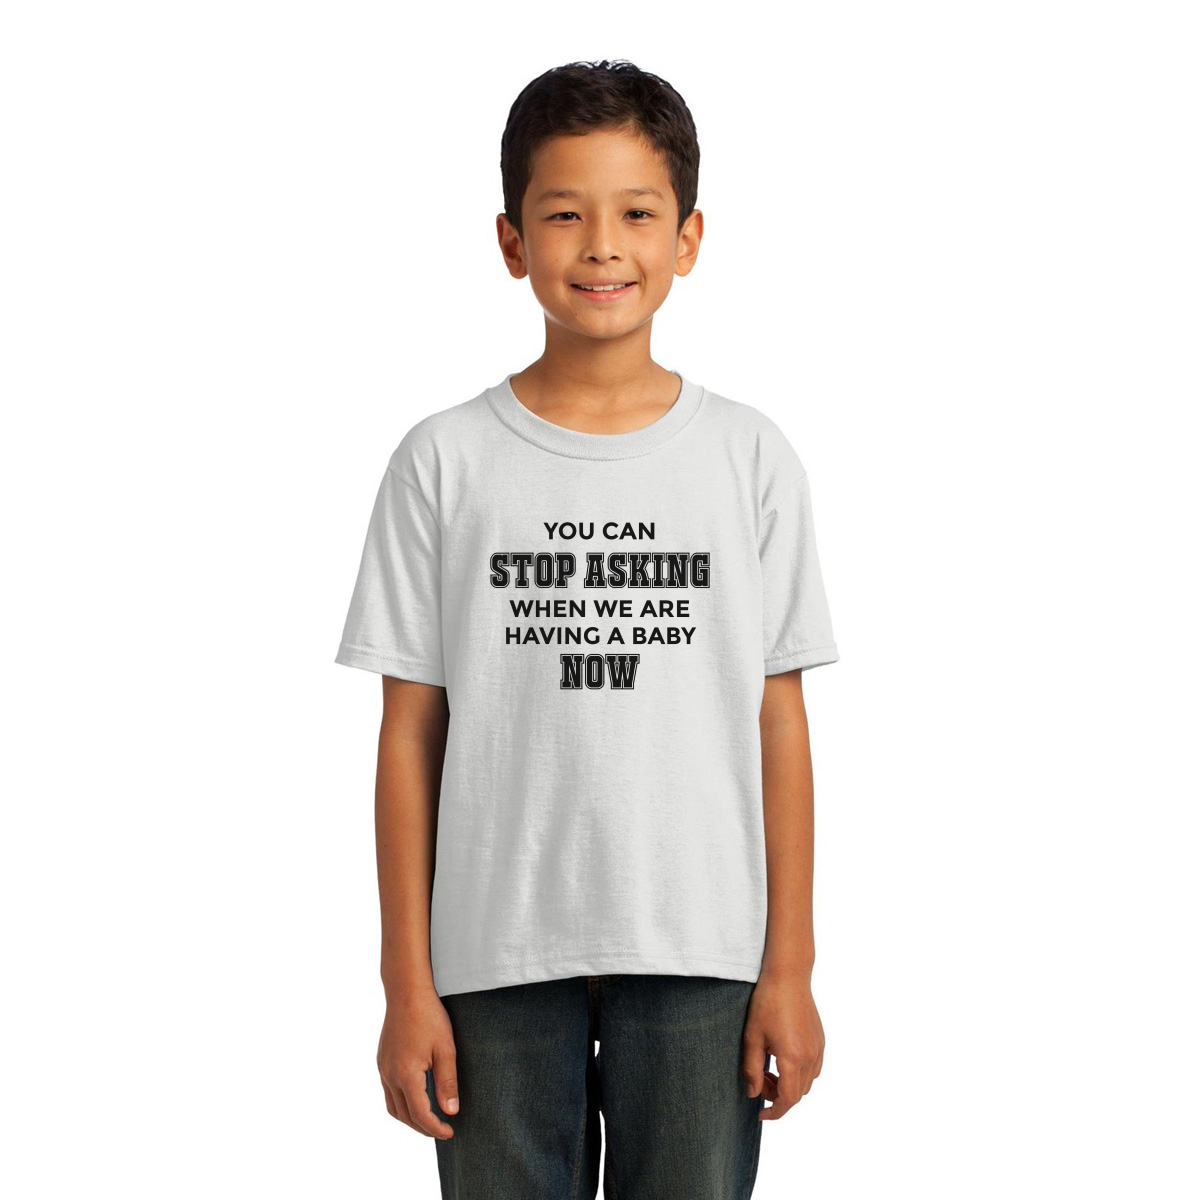 You can stop asking when we are having baby NOW Kids T-shirt | White